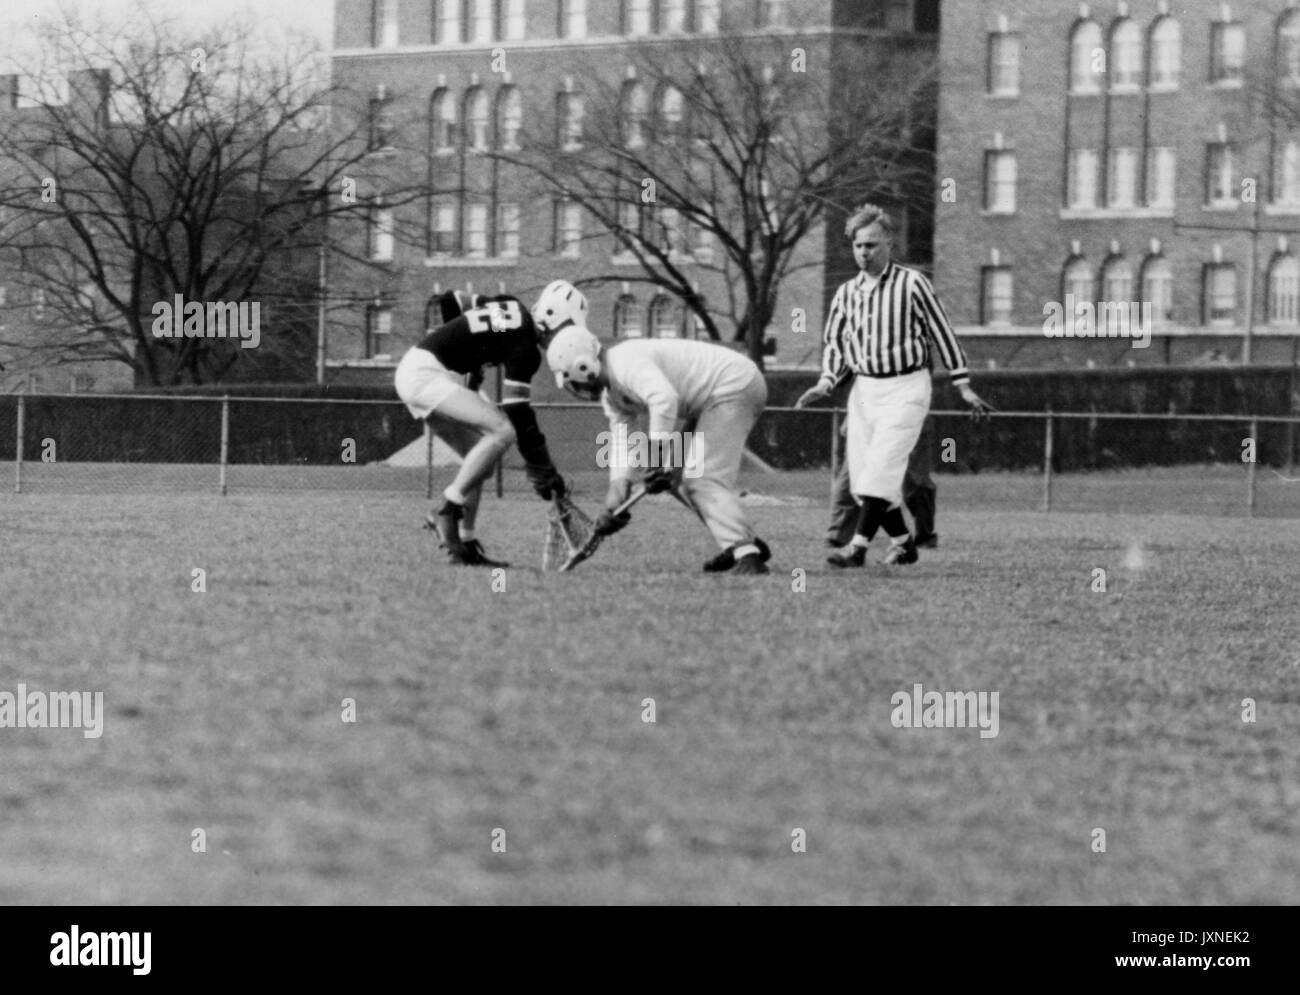 Lacrosse, Alumni Action shot from the Hopkins vs Alumni match, Opposing players are vying for the ball, 1947. Stock Photo